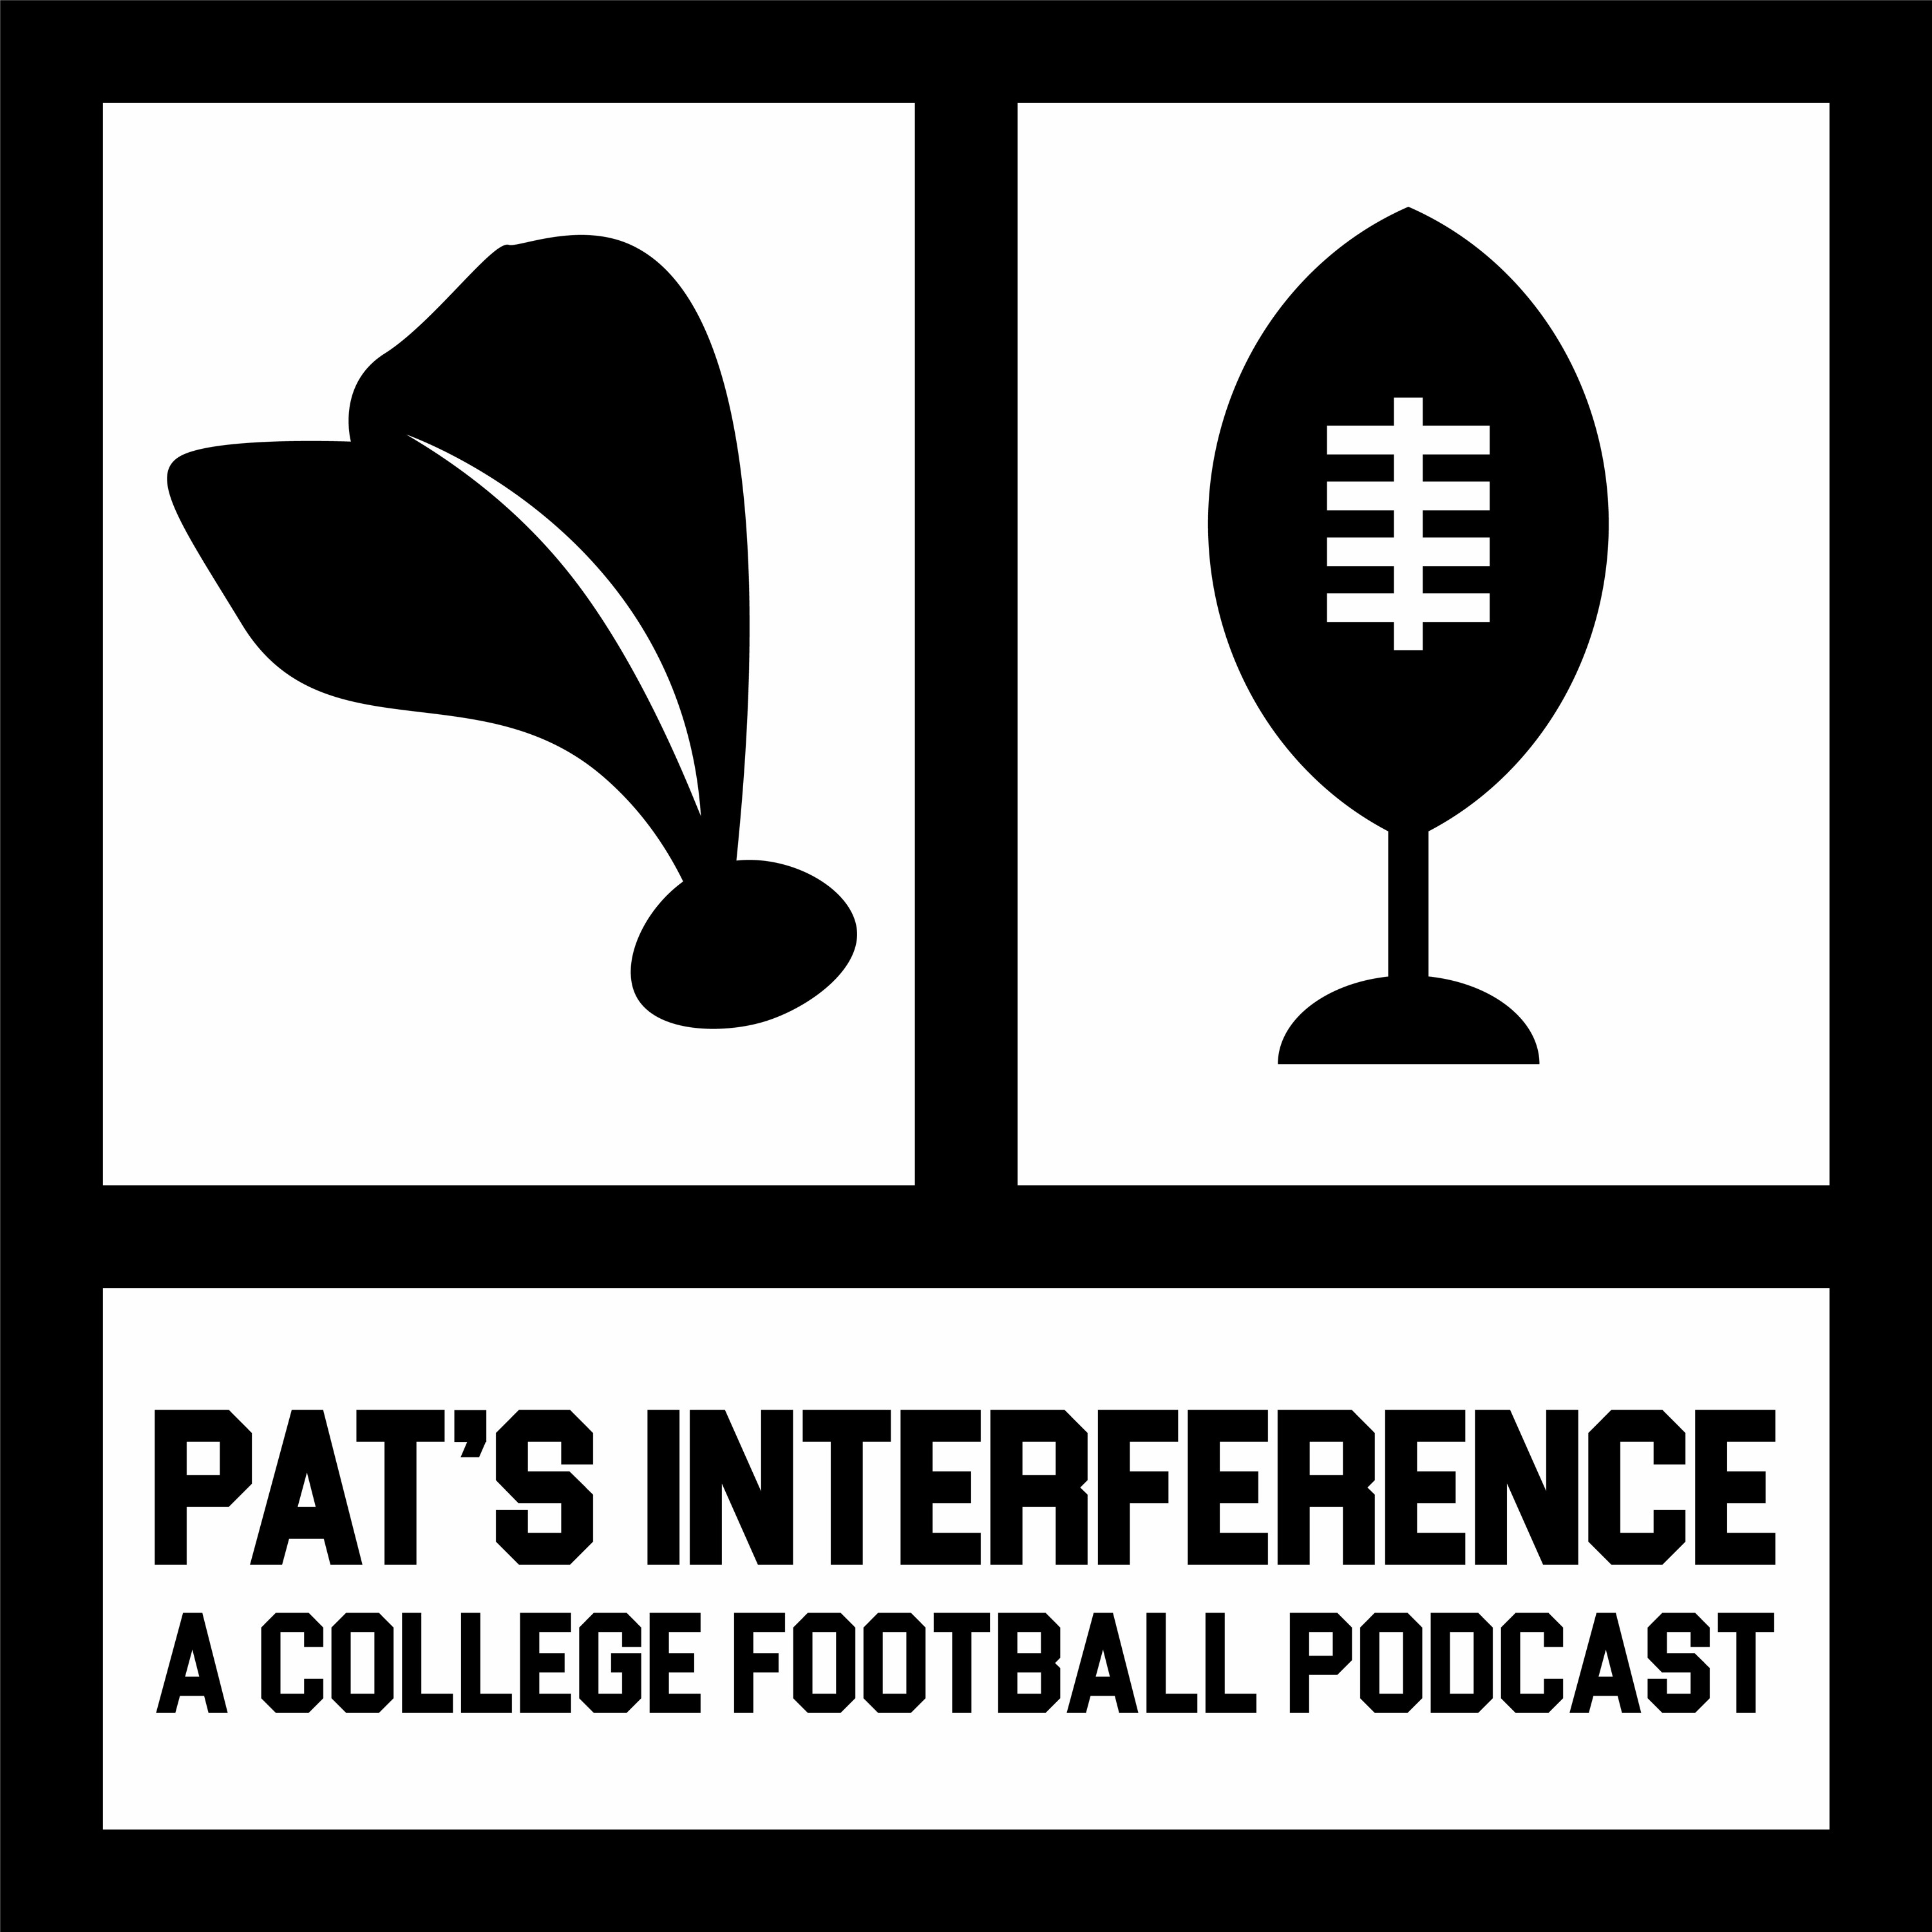 Pat’s Interference - The Rhoads to the College Football Playoff